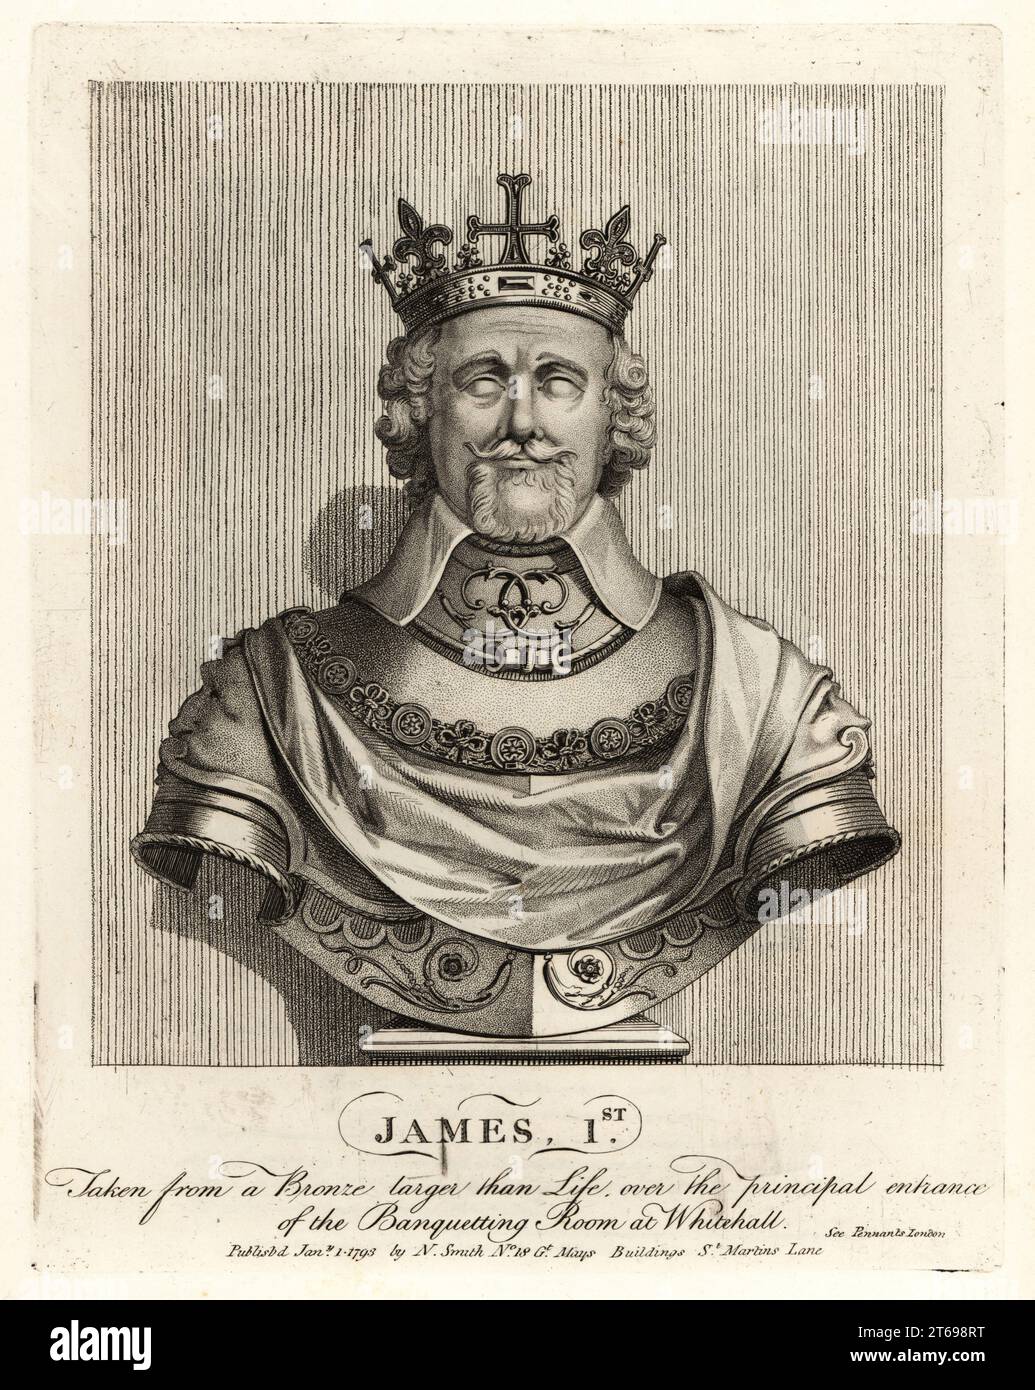 King James I of England taken from a bronze bust over the entrance of the Banquetting Room at Whitehall. Copperplate engraving by John Thomas Smith after original drawings by members of the Society of Antiquaries from his J.T. Smiths Antiquities of London and its Environs, J. Sewell, R. Folder, J. Simco, London, 1793. Stock Photo